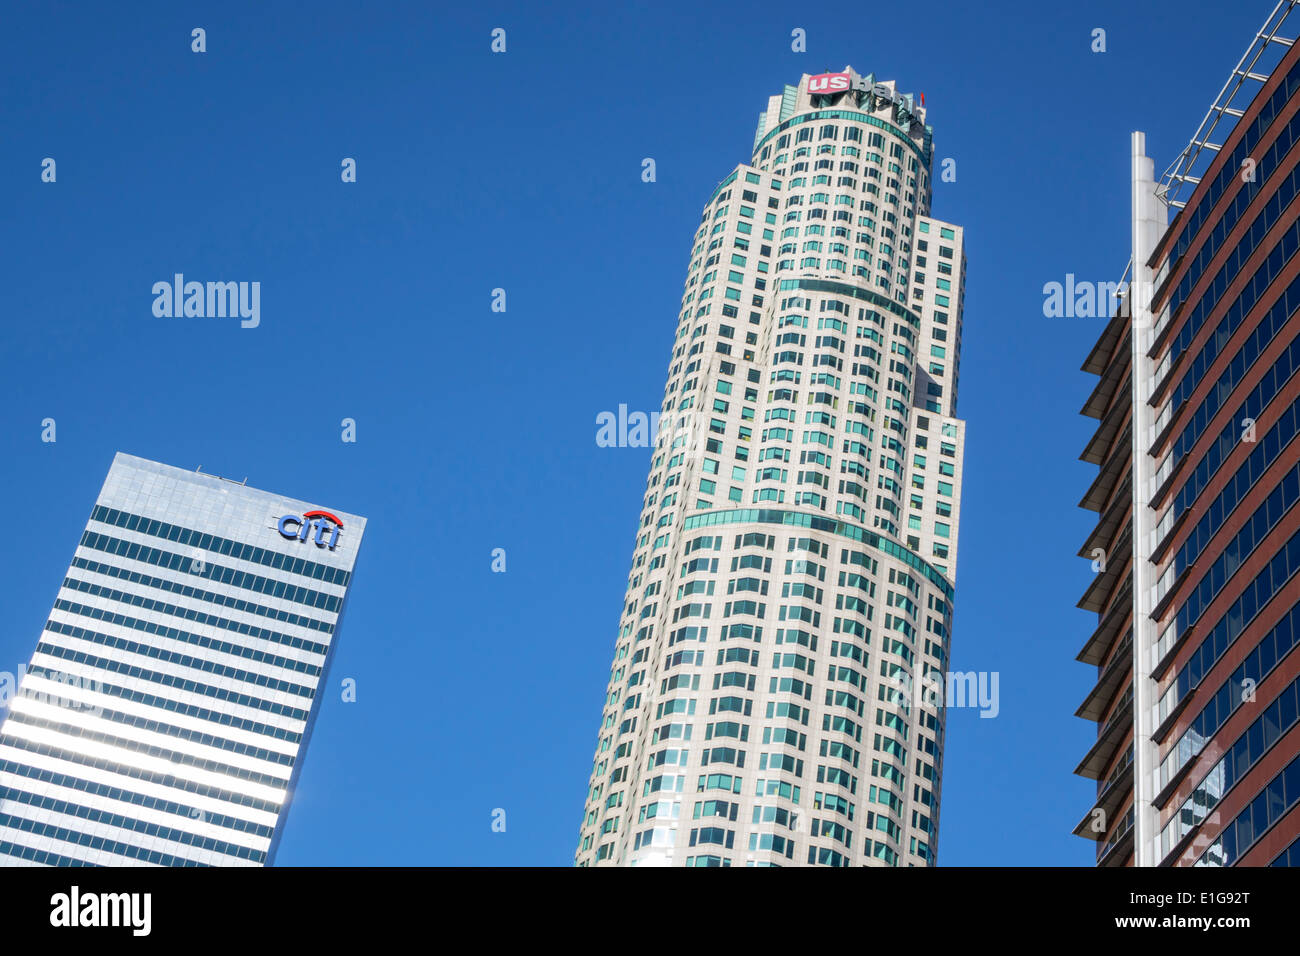 Los Angeles California,Downtown,Financial District,city skyline,skyscraper,high-rise,building,US Bank Tower,Library Tower,round,postmodern,architectur Stock Photo